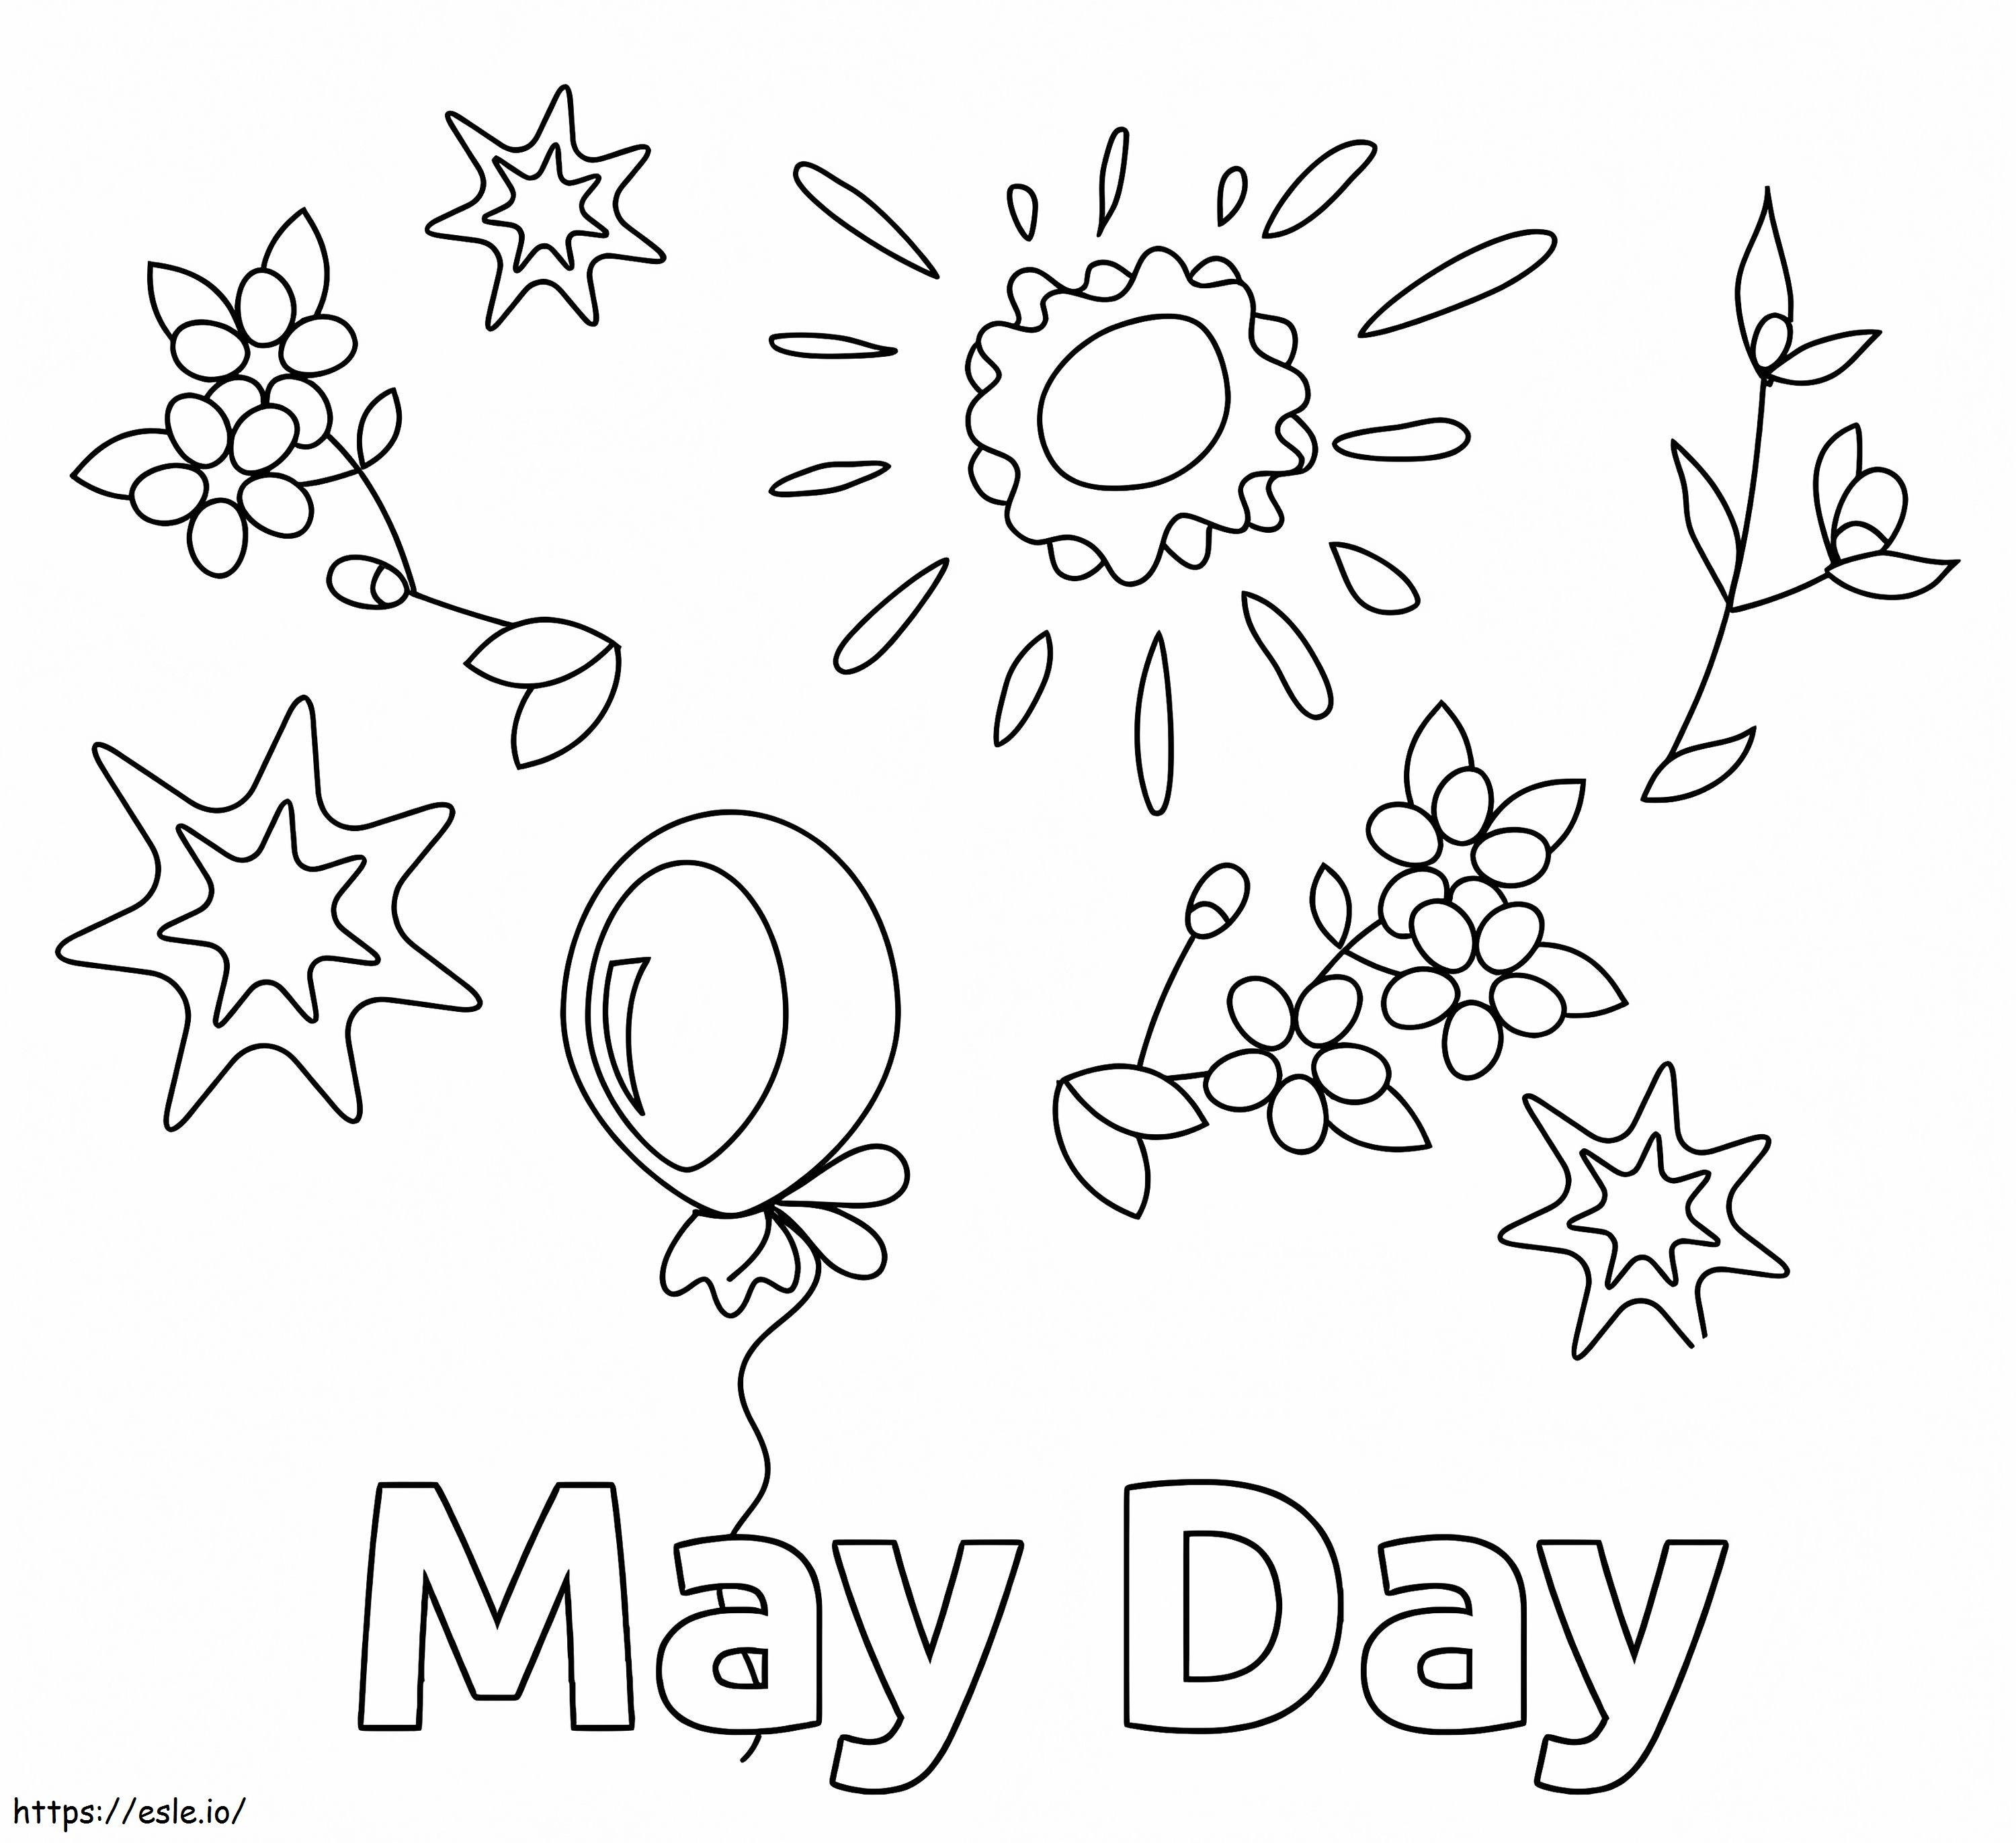 May Day 8 coloring page